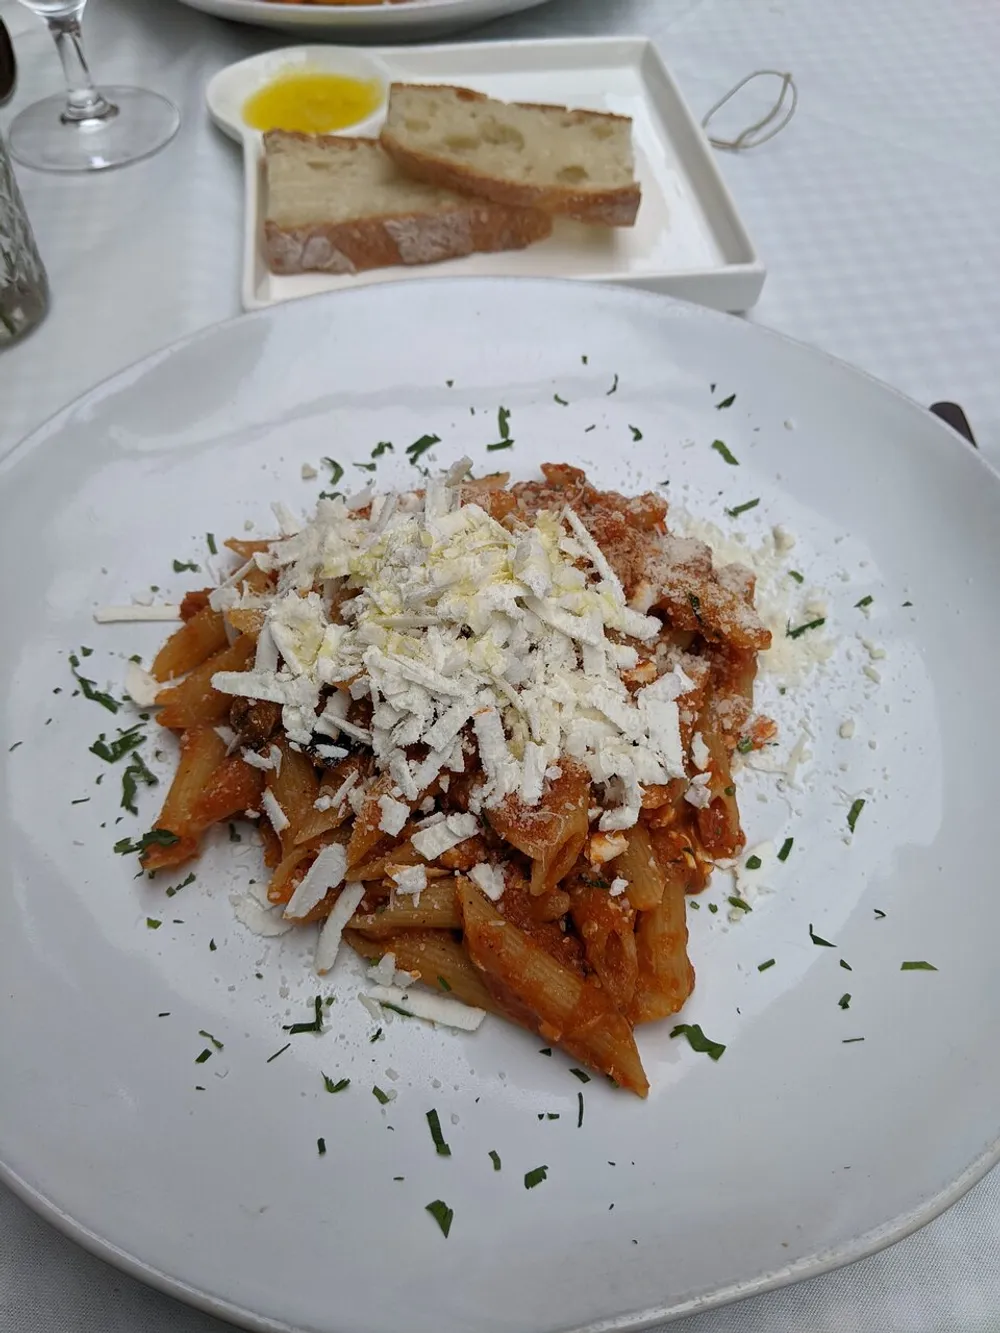 The image shows a plate of pasta topped with grated cheese accompanied by slices of bread and olive oil served on a white plate at a dining table